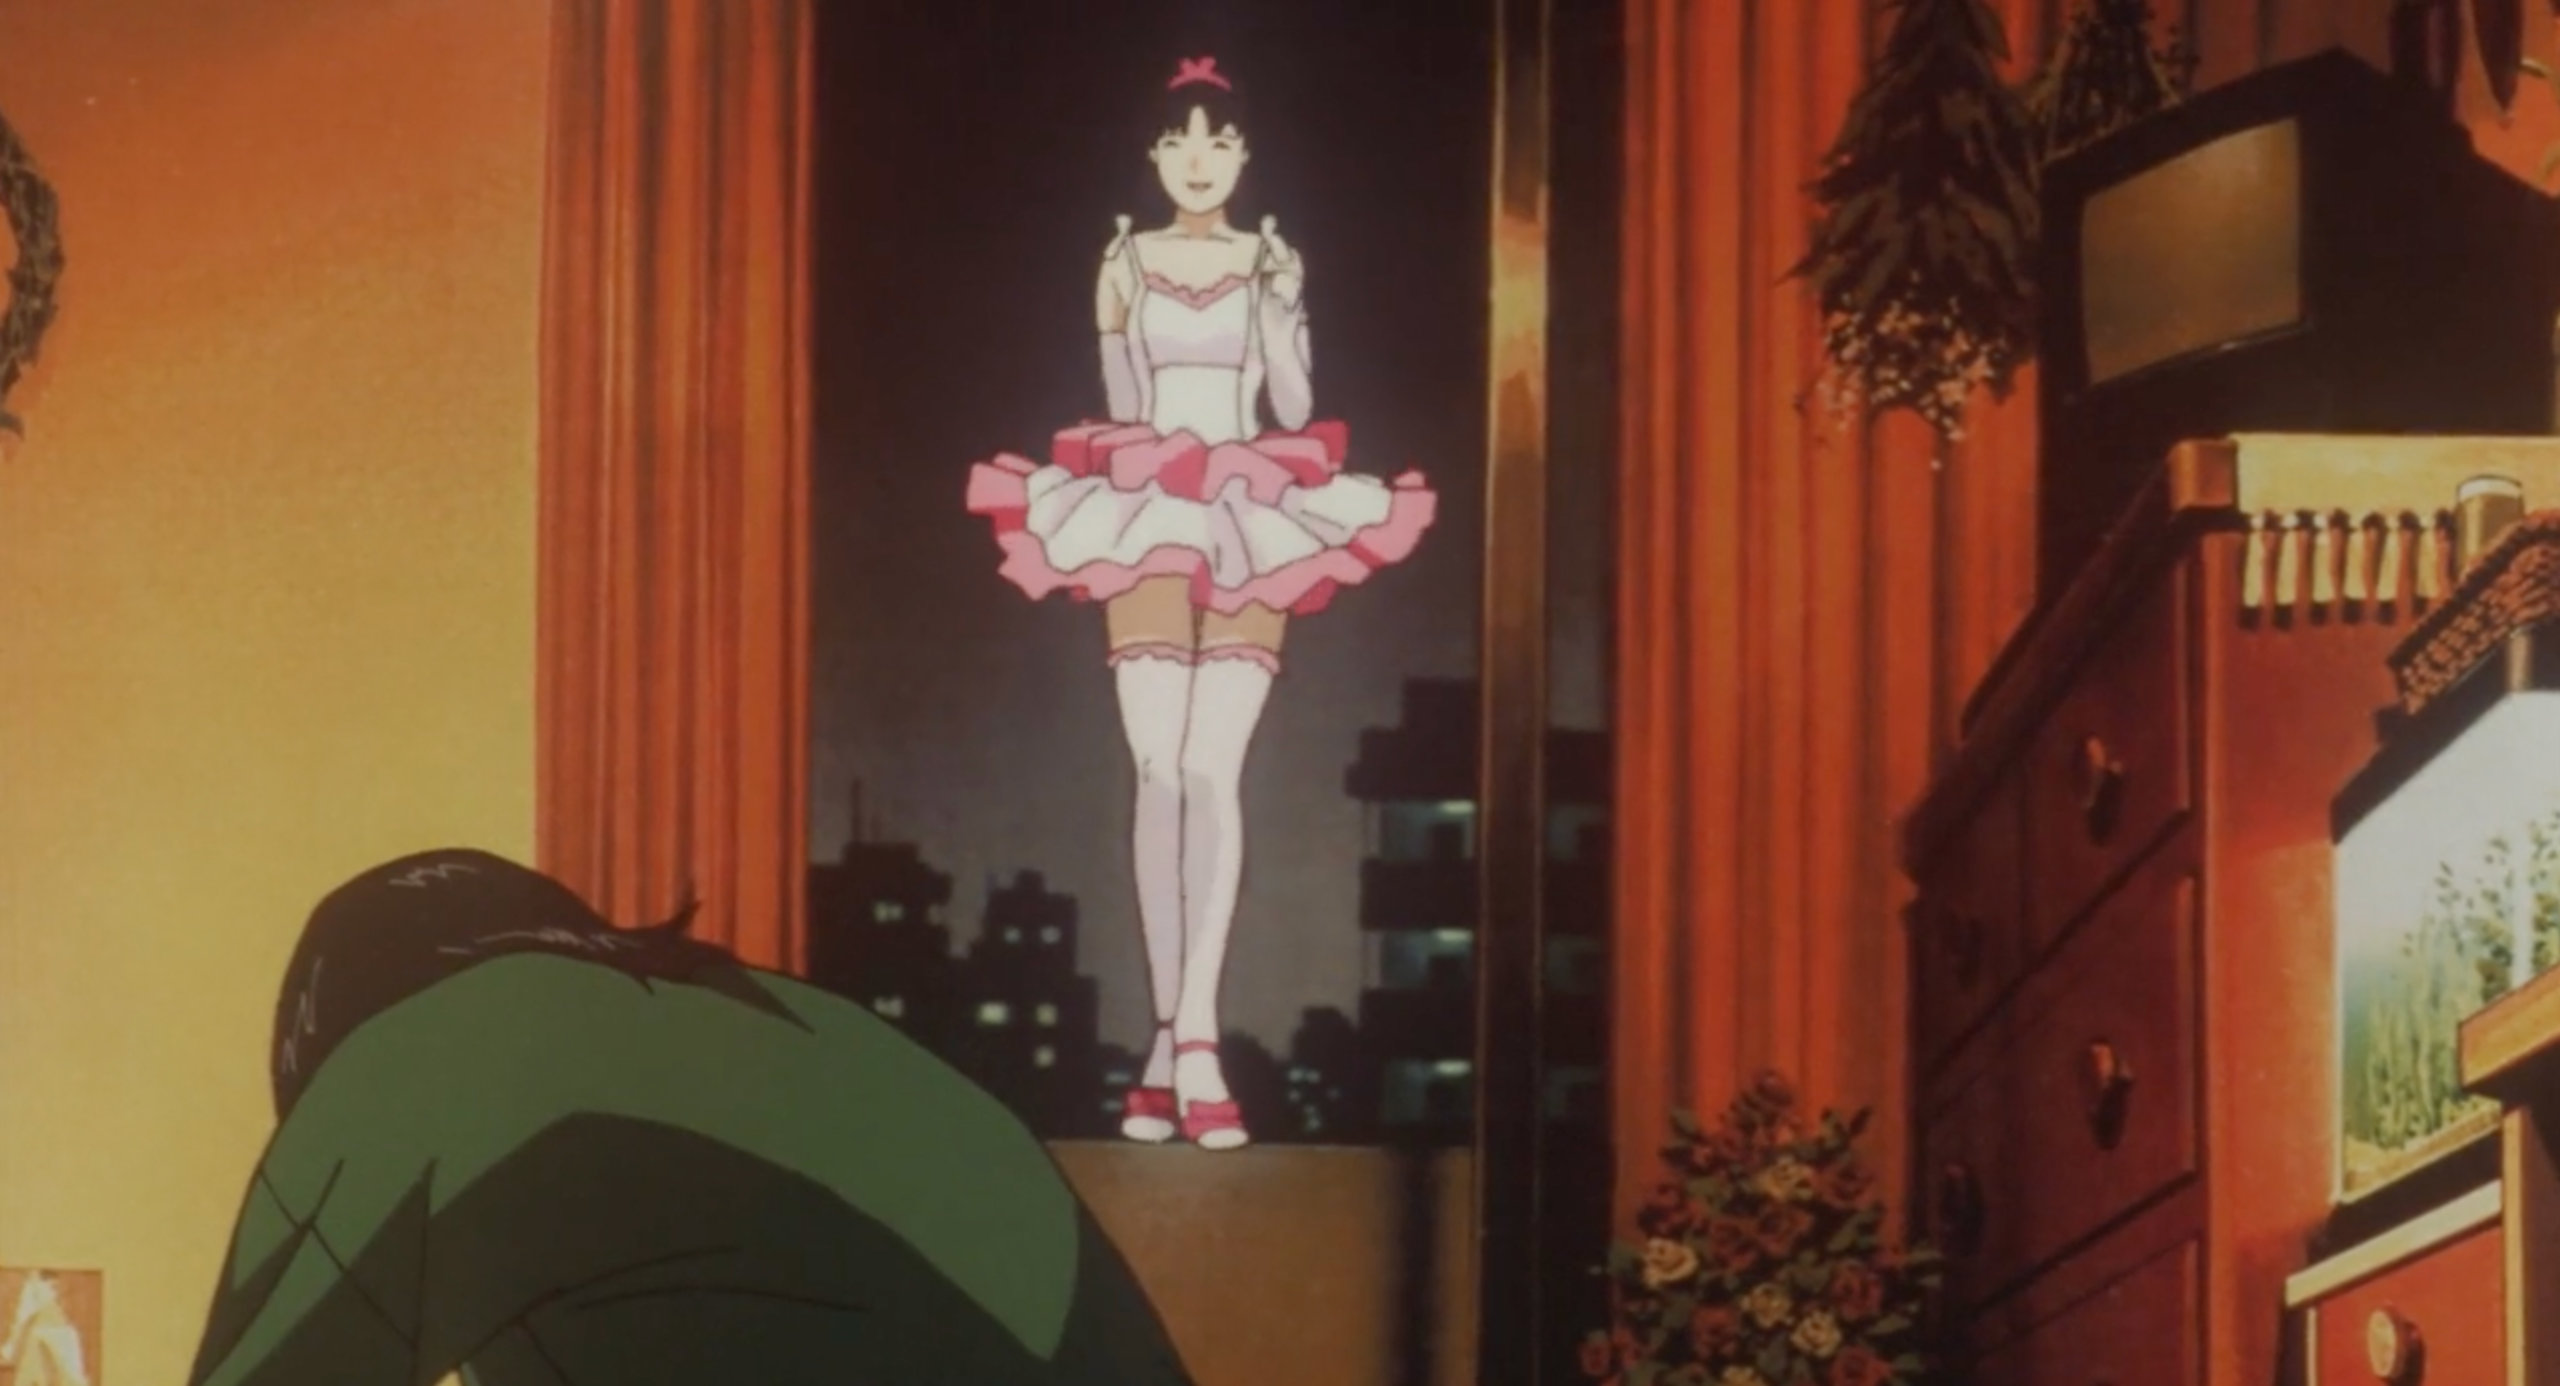 Idol Mima floats in the window of Mima's room in Perfect Blue